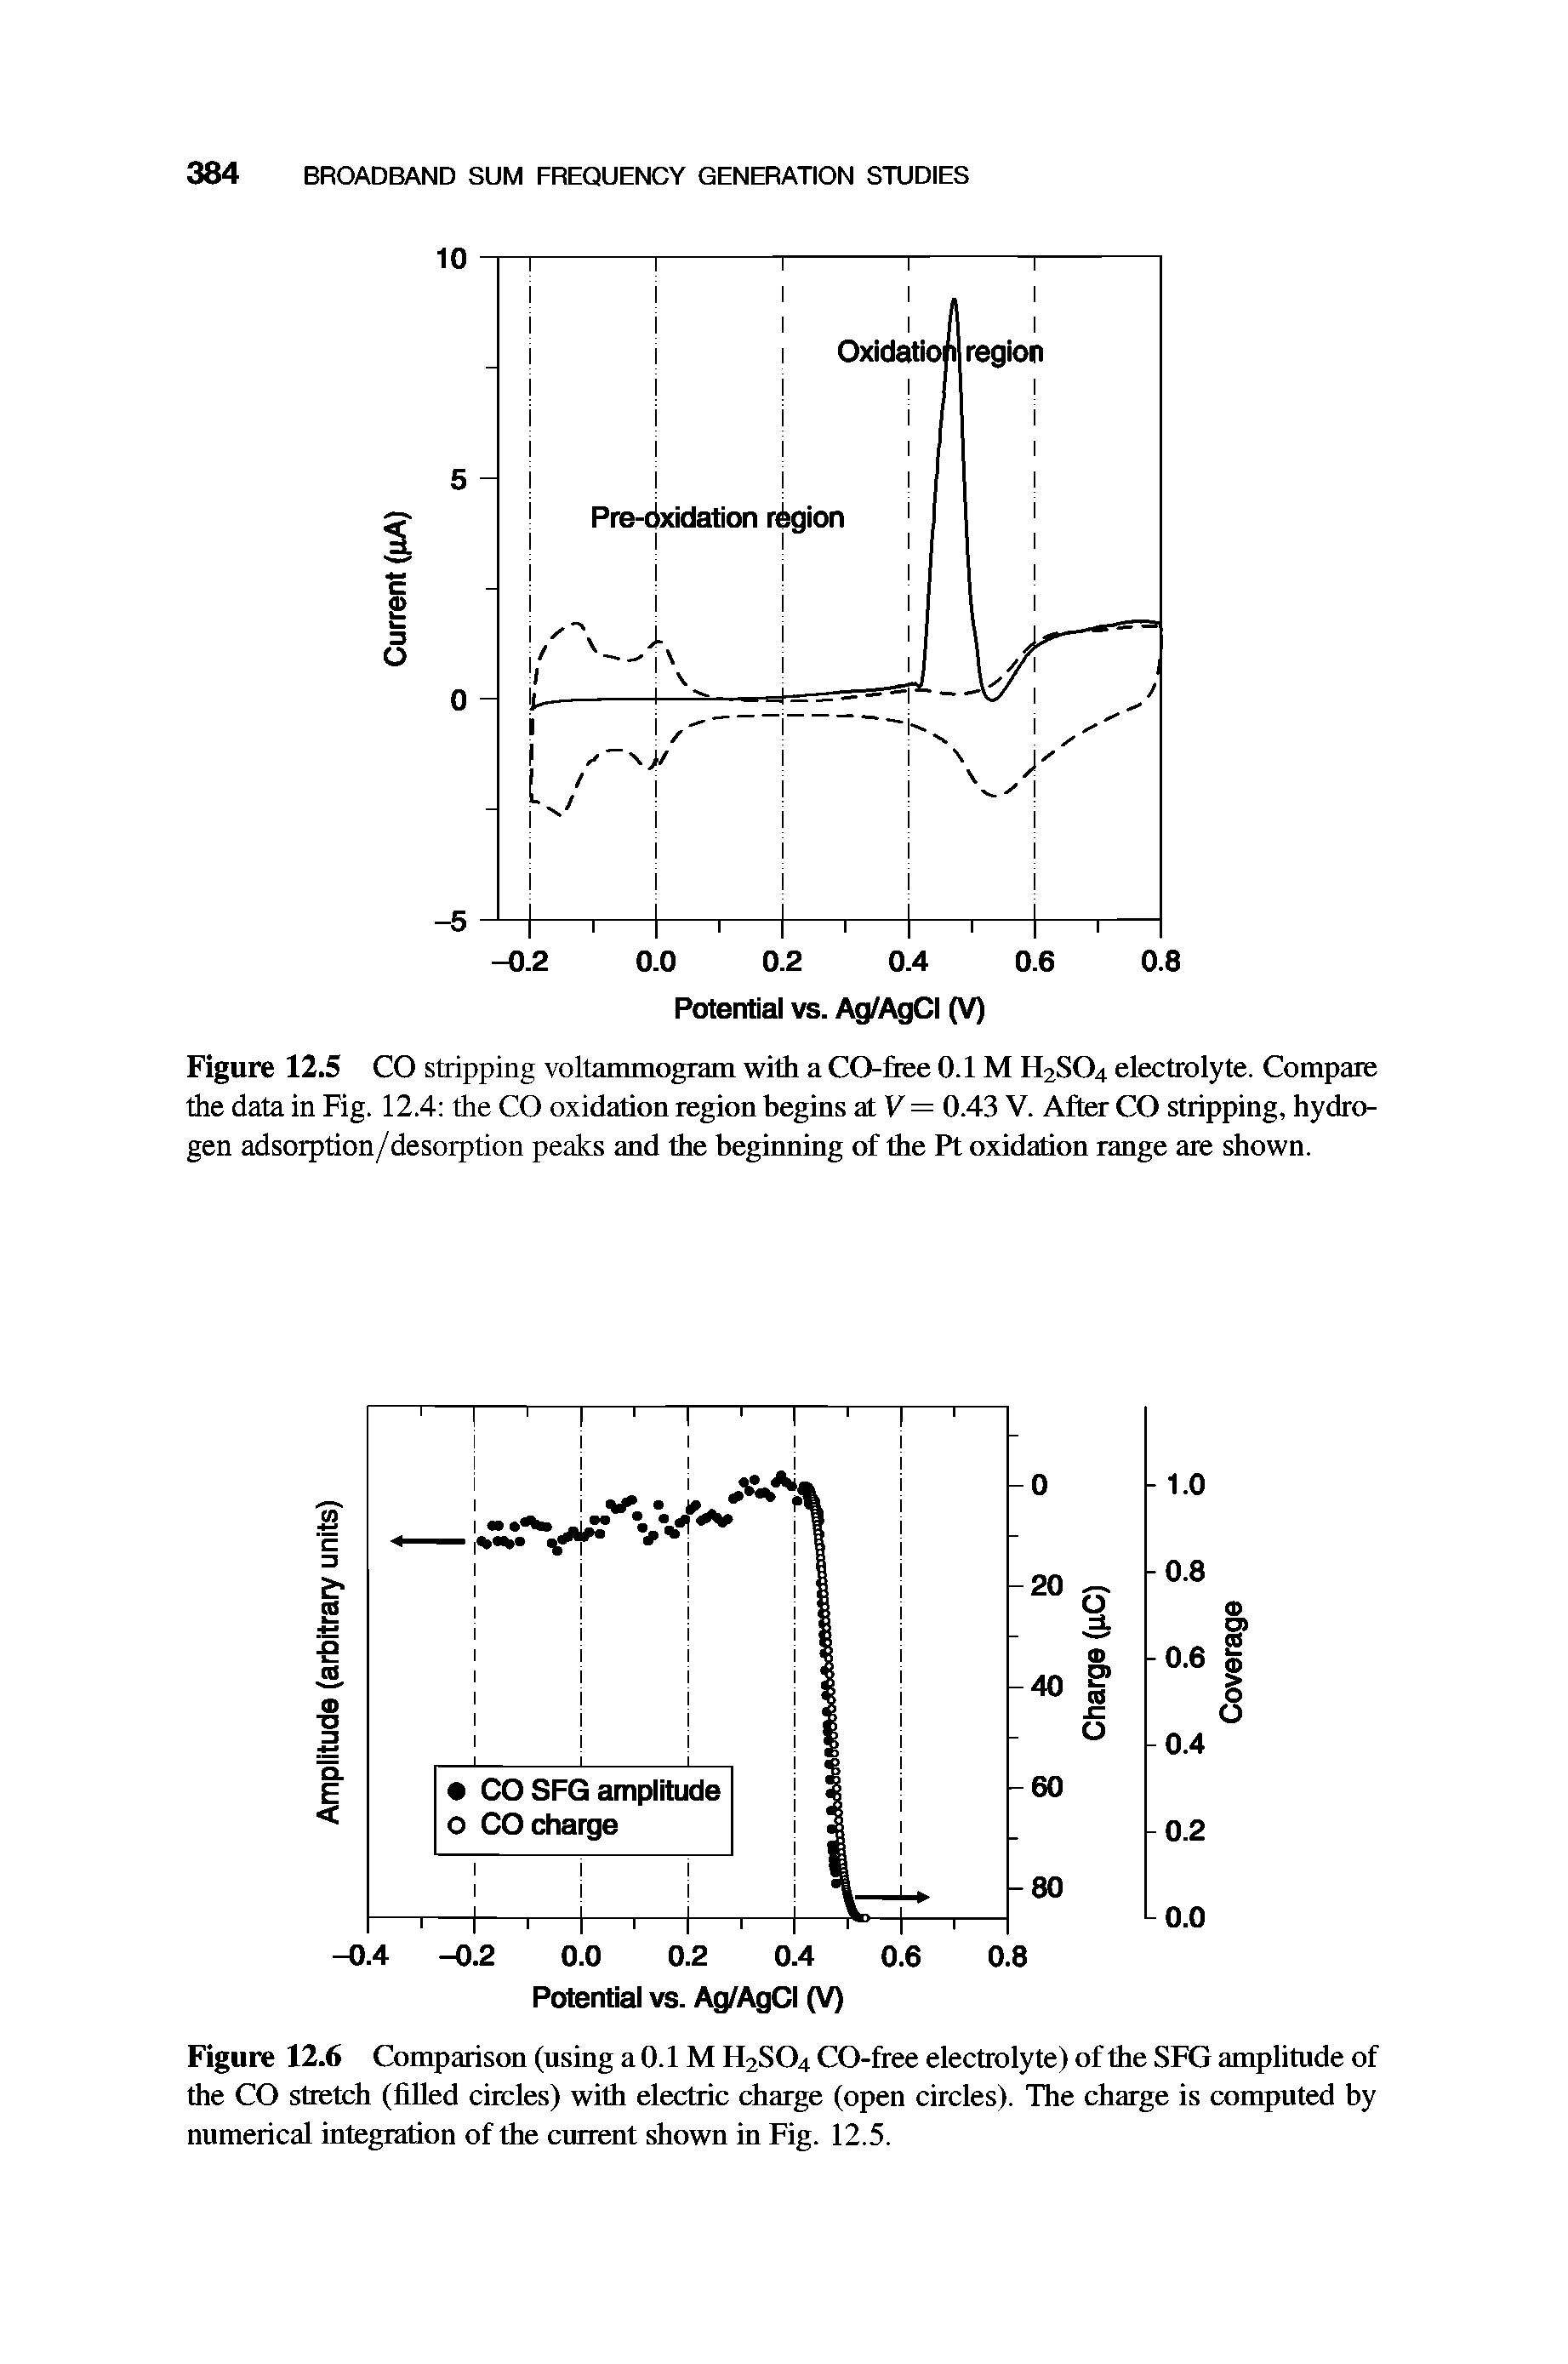 Figure 12.5 CO stripping voltammogram with a CO- tee 0.1 M H2SO4 electrolyte. Compare the data in Fig. 12.4 the CO oxidation region begins at V = 0.43 V. After CO stripping, hydrogen adsorption/desorption peaks and the beginning of the Pt oxidation range are shown.